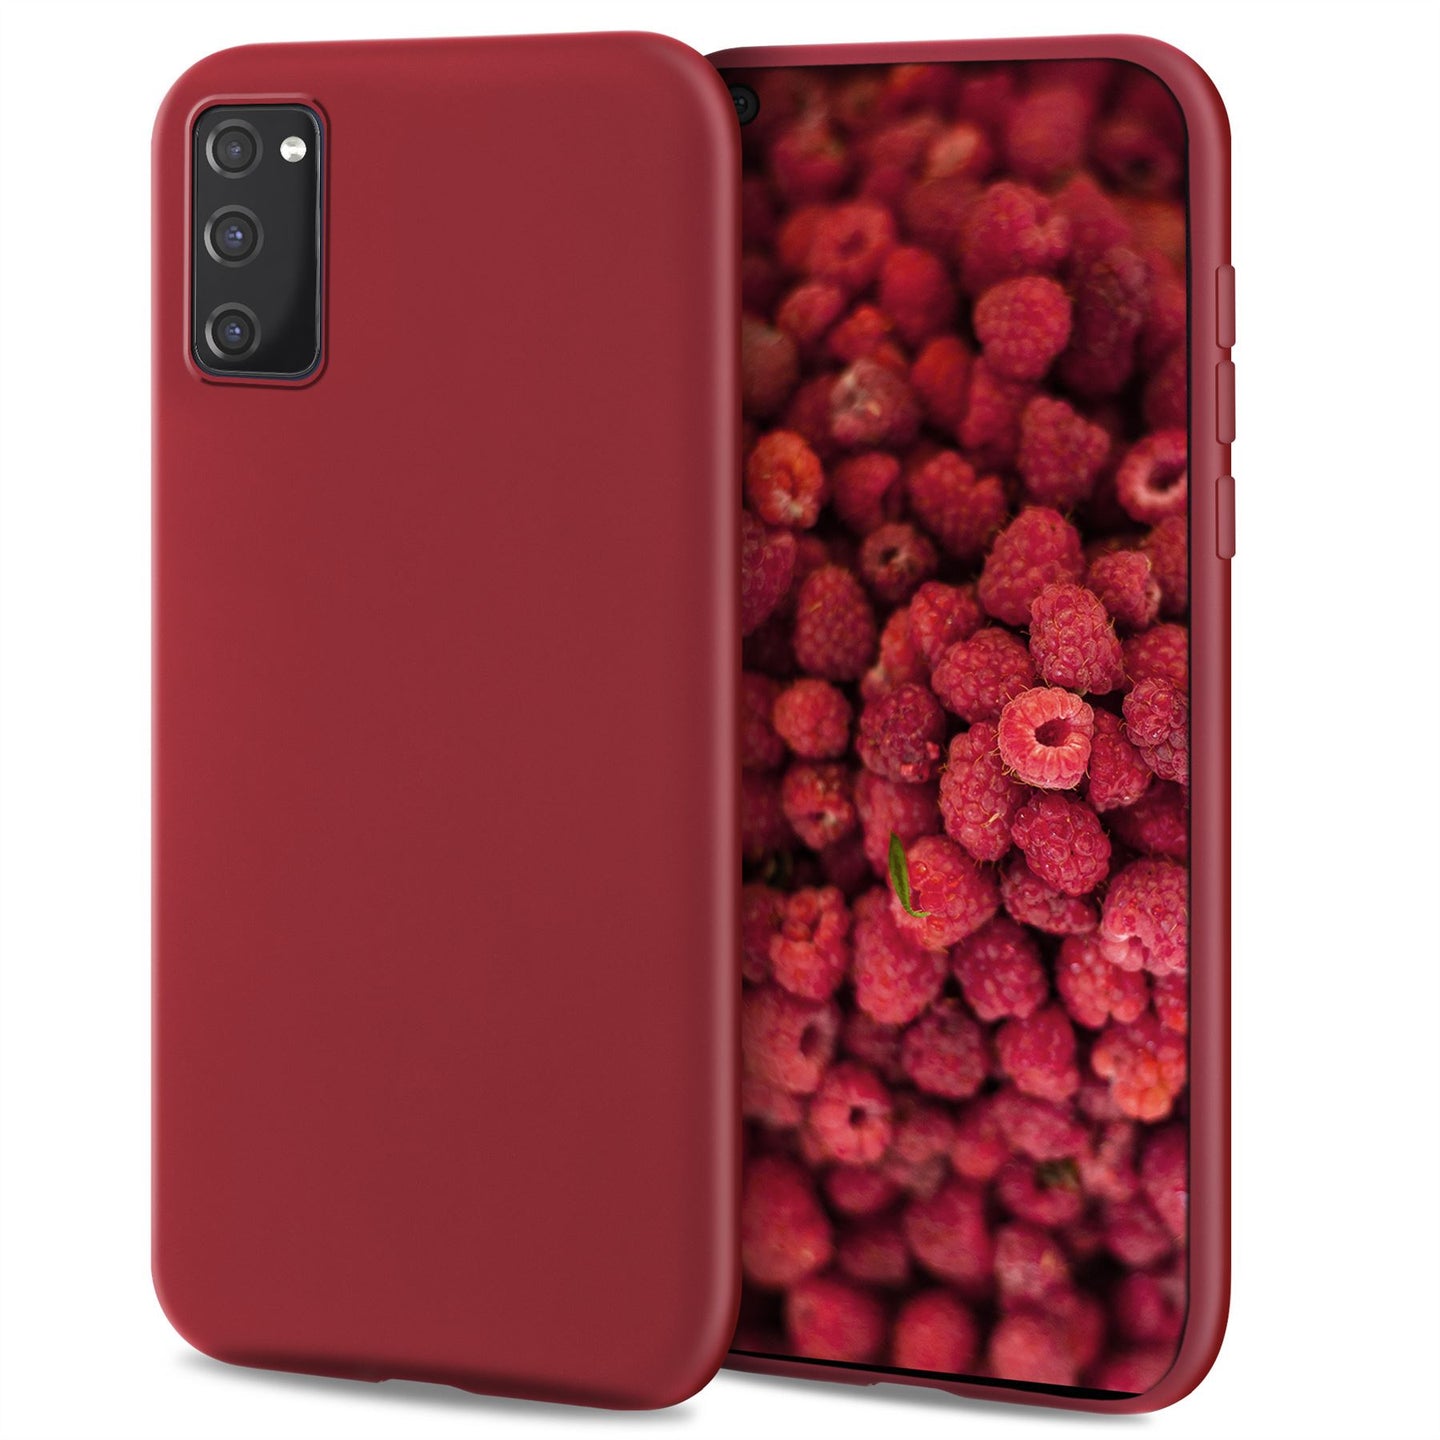 Moozy Lifestyle. Designed for Samsung A51 Case, Vintage Pink - Liquid Silicone Cover with Matte Finish and Soft Microfiber Lining